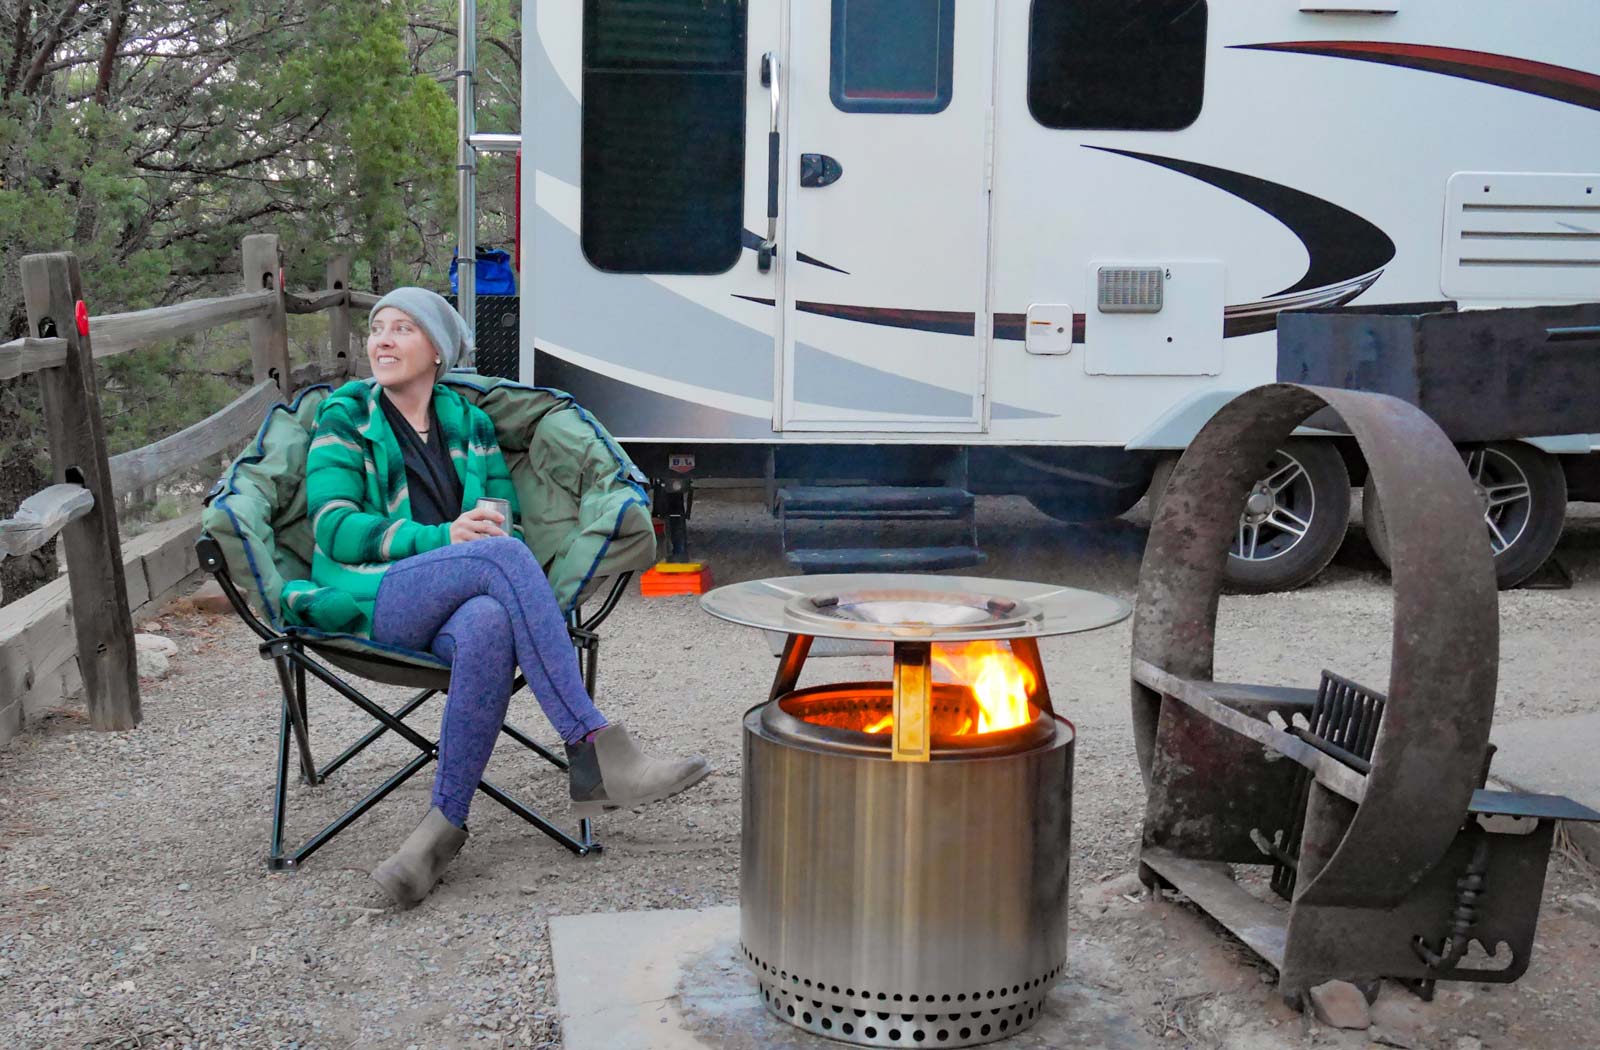 woman sitting at campsite with solo stove fire pit